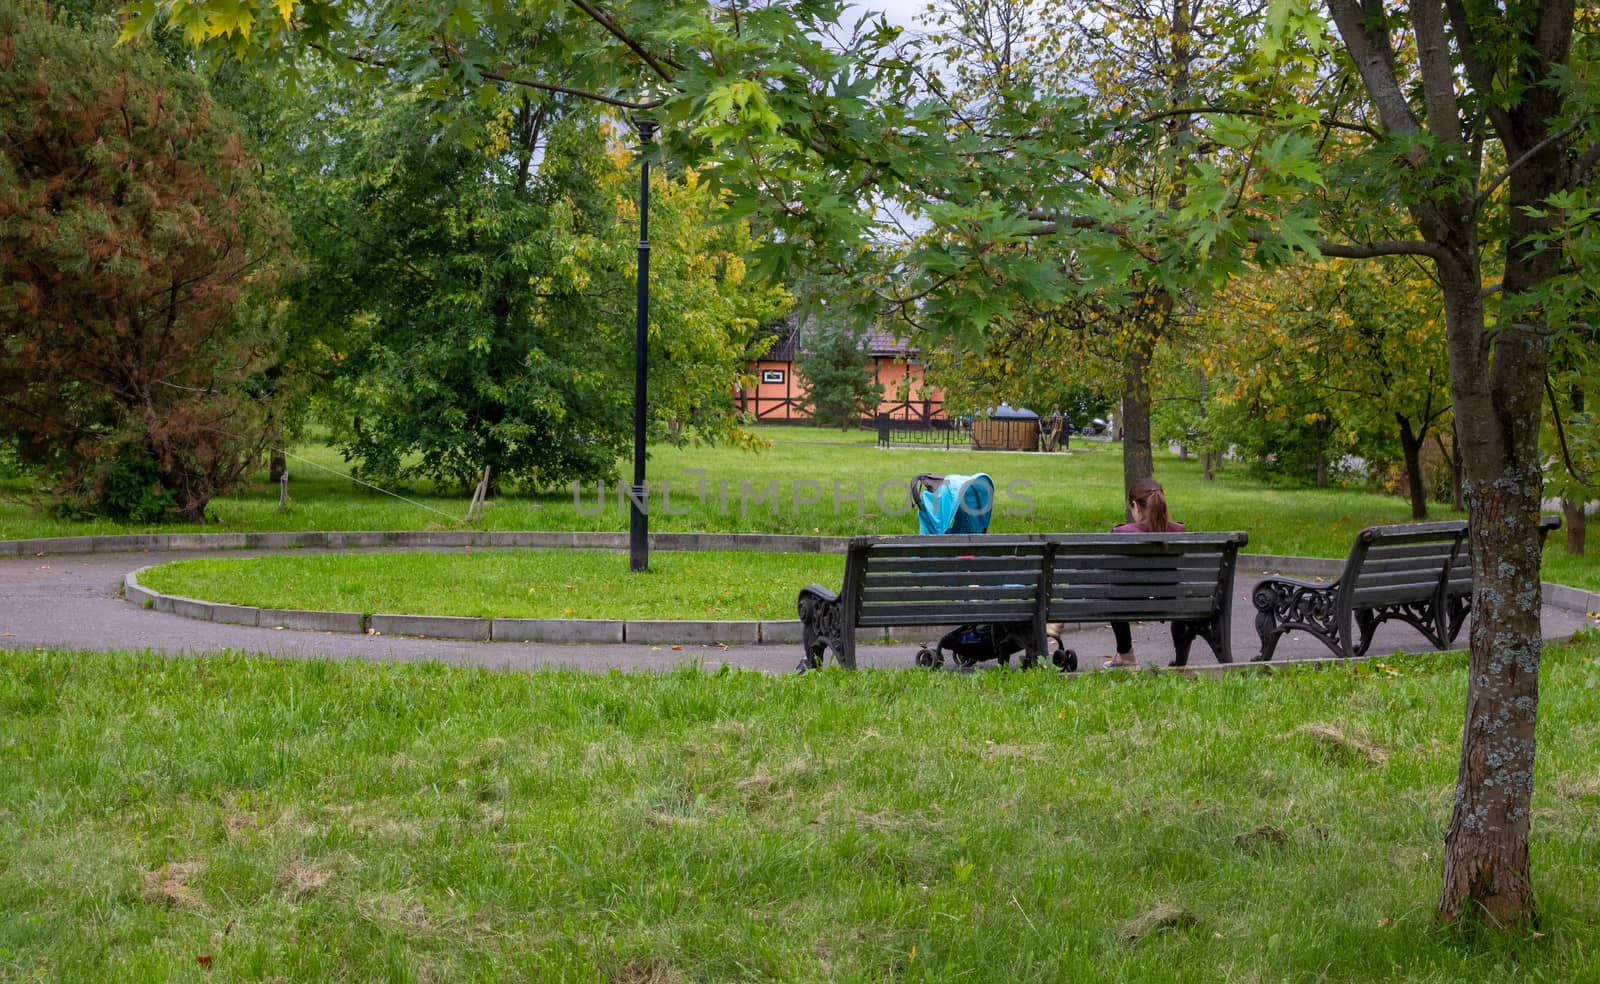 A young sports mom with a stroller sits on a wooden bench in the Park.Healthy outdoor sleep by lapushka62